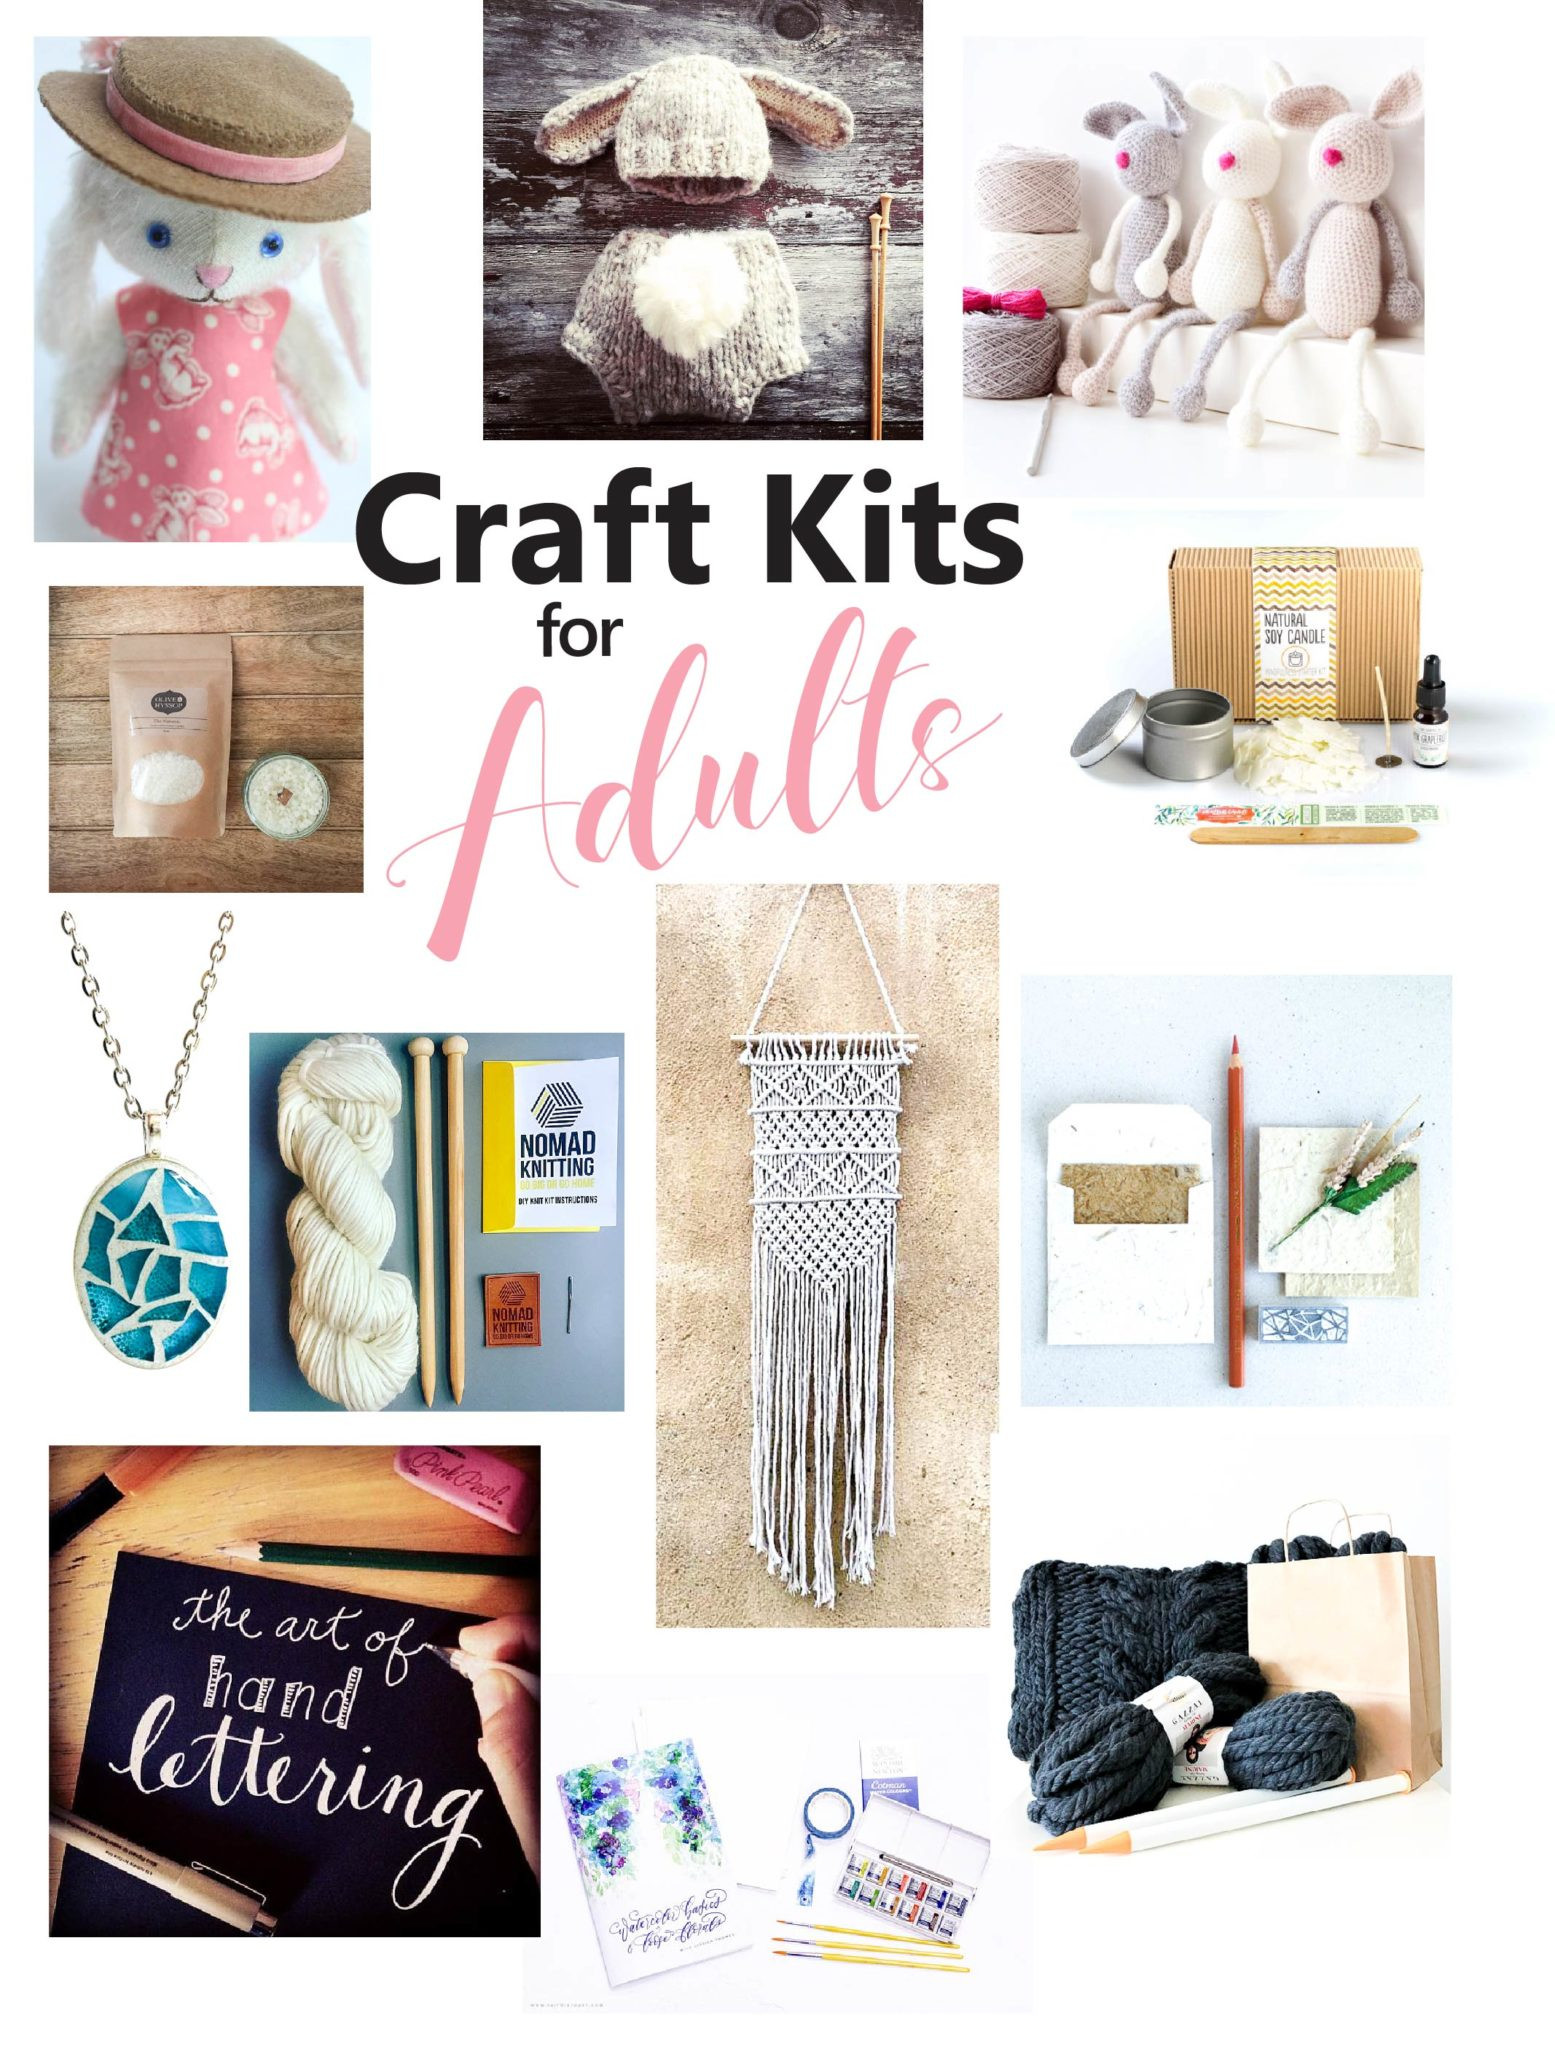 Crafting Kits For Adults
 The Best Craft Kits for Adults – Sustain My Craft Habit